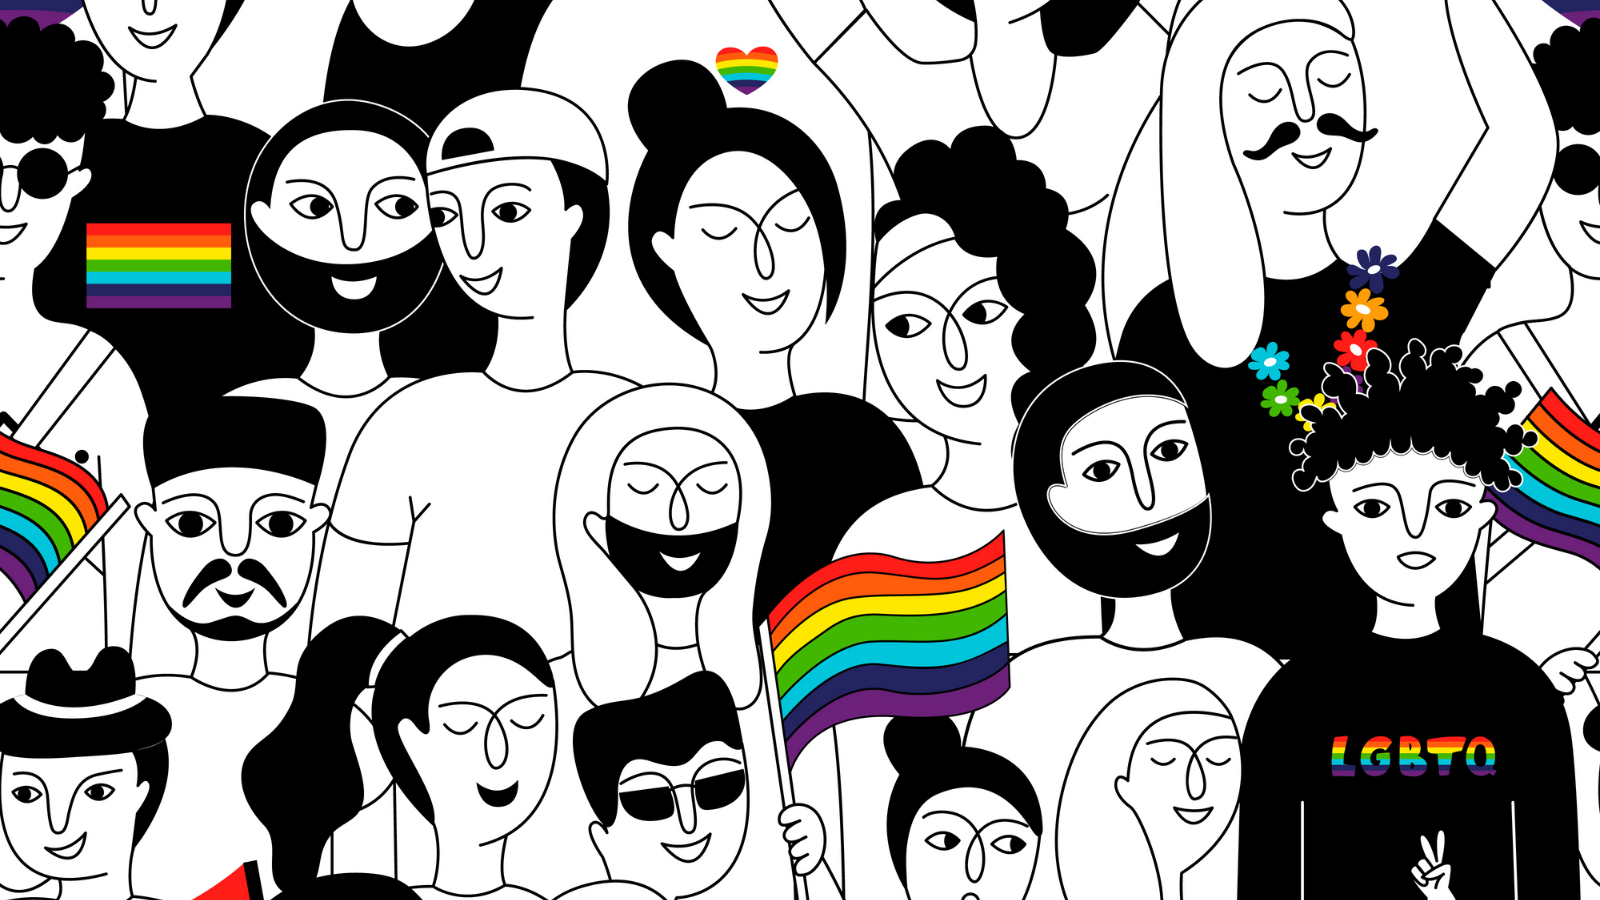 A seamless pattern of people at a pride parade - doodle style.